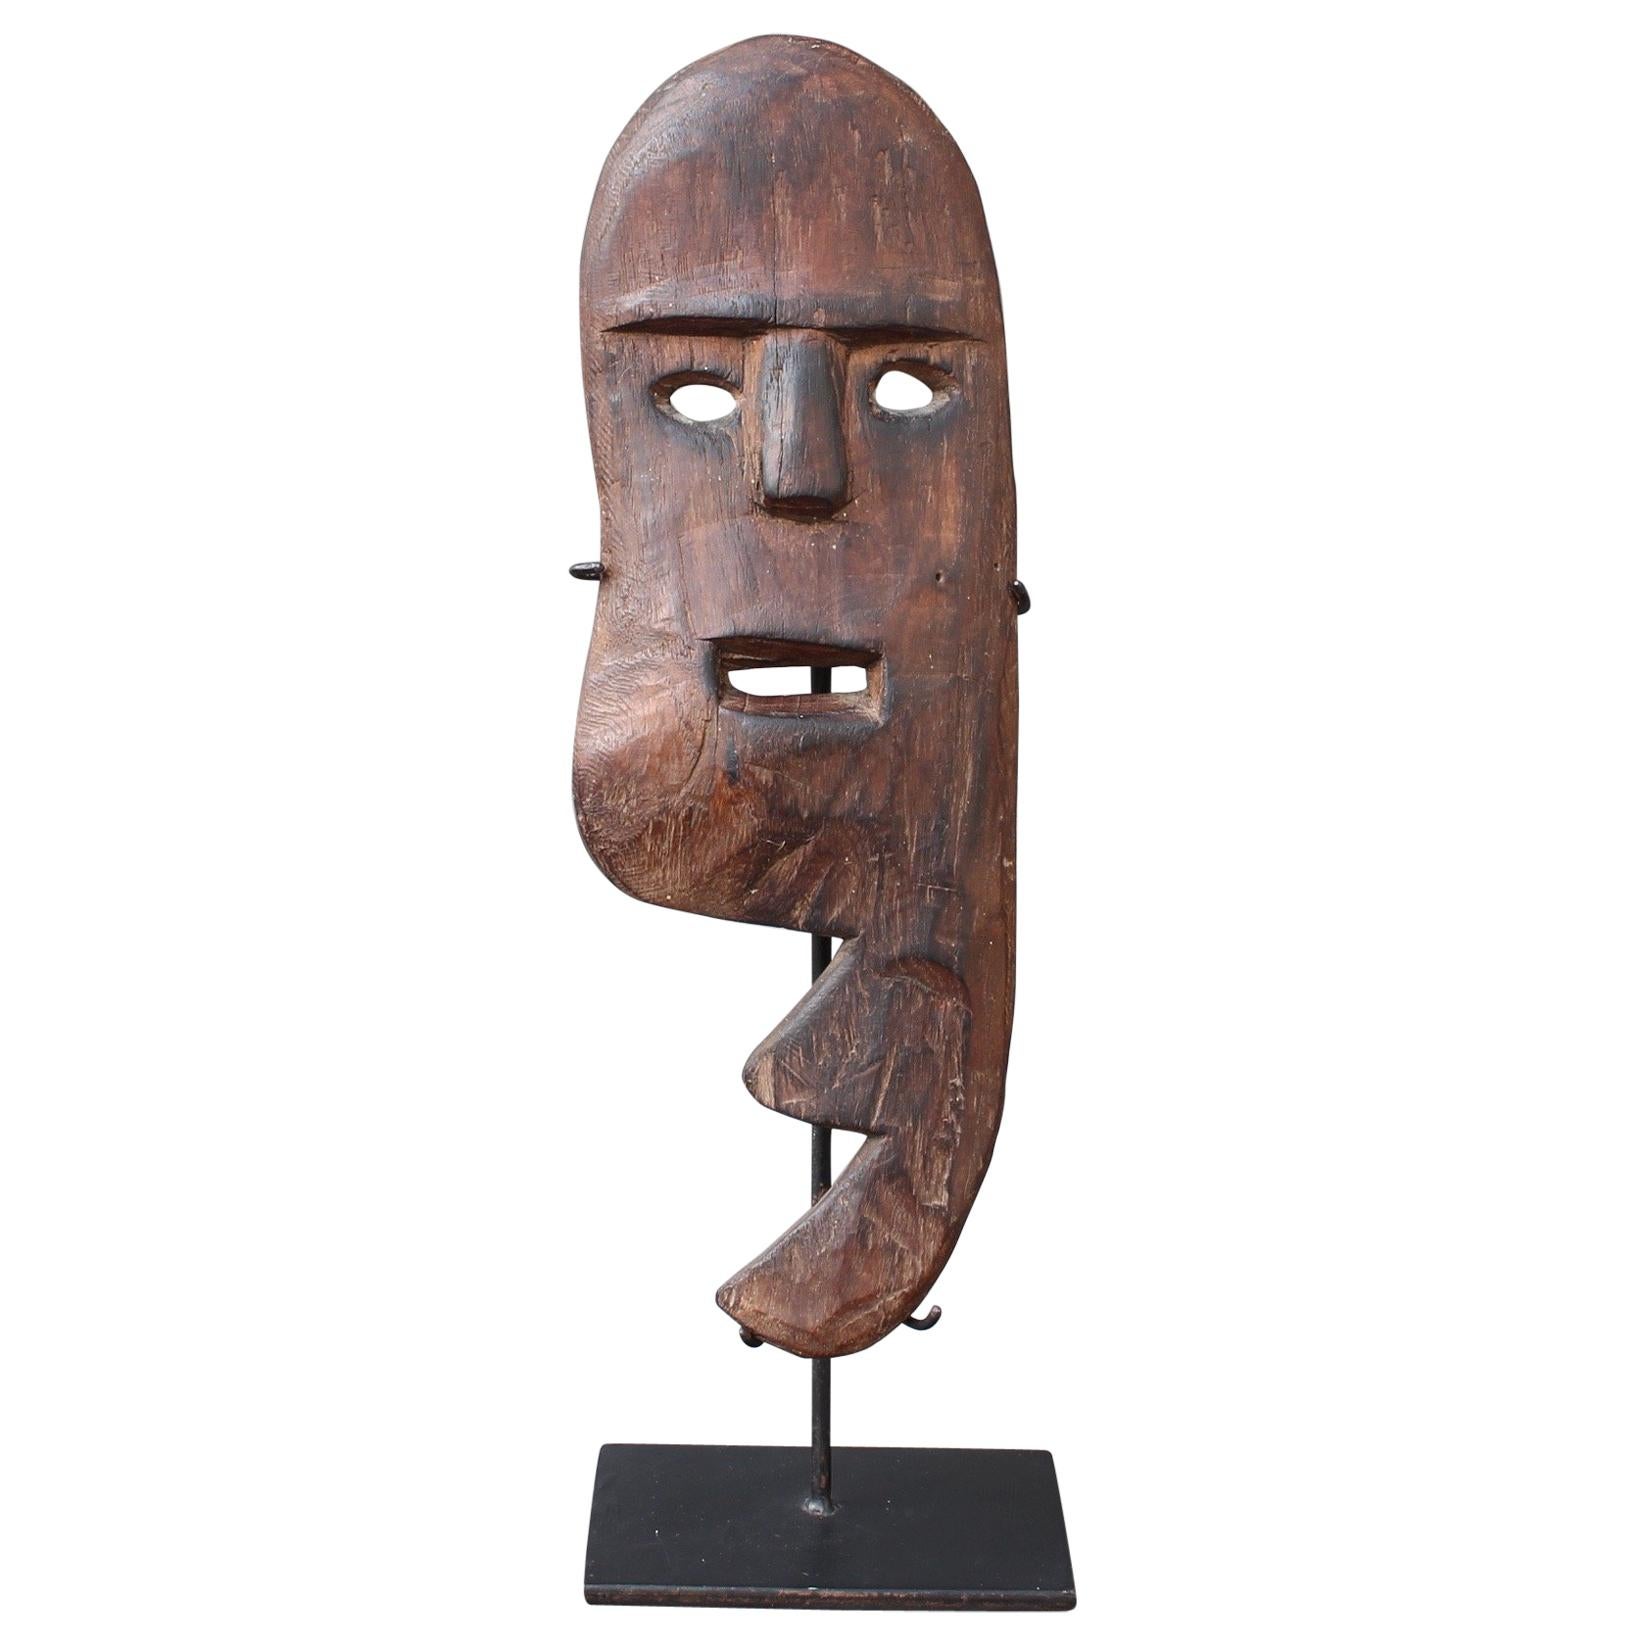 Sculpted Wooden Traditional Mask from Timor, Indonesia, circa 1960s-1970s